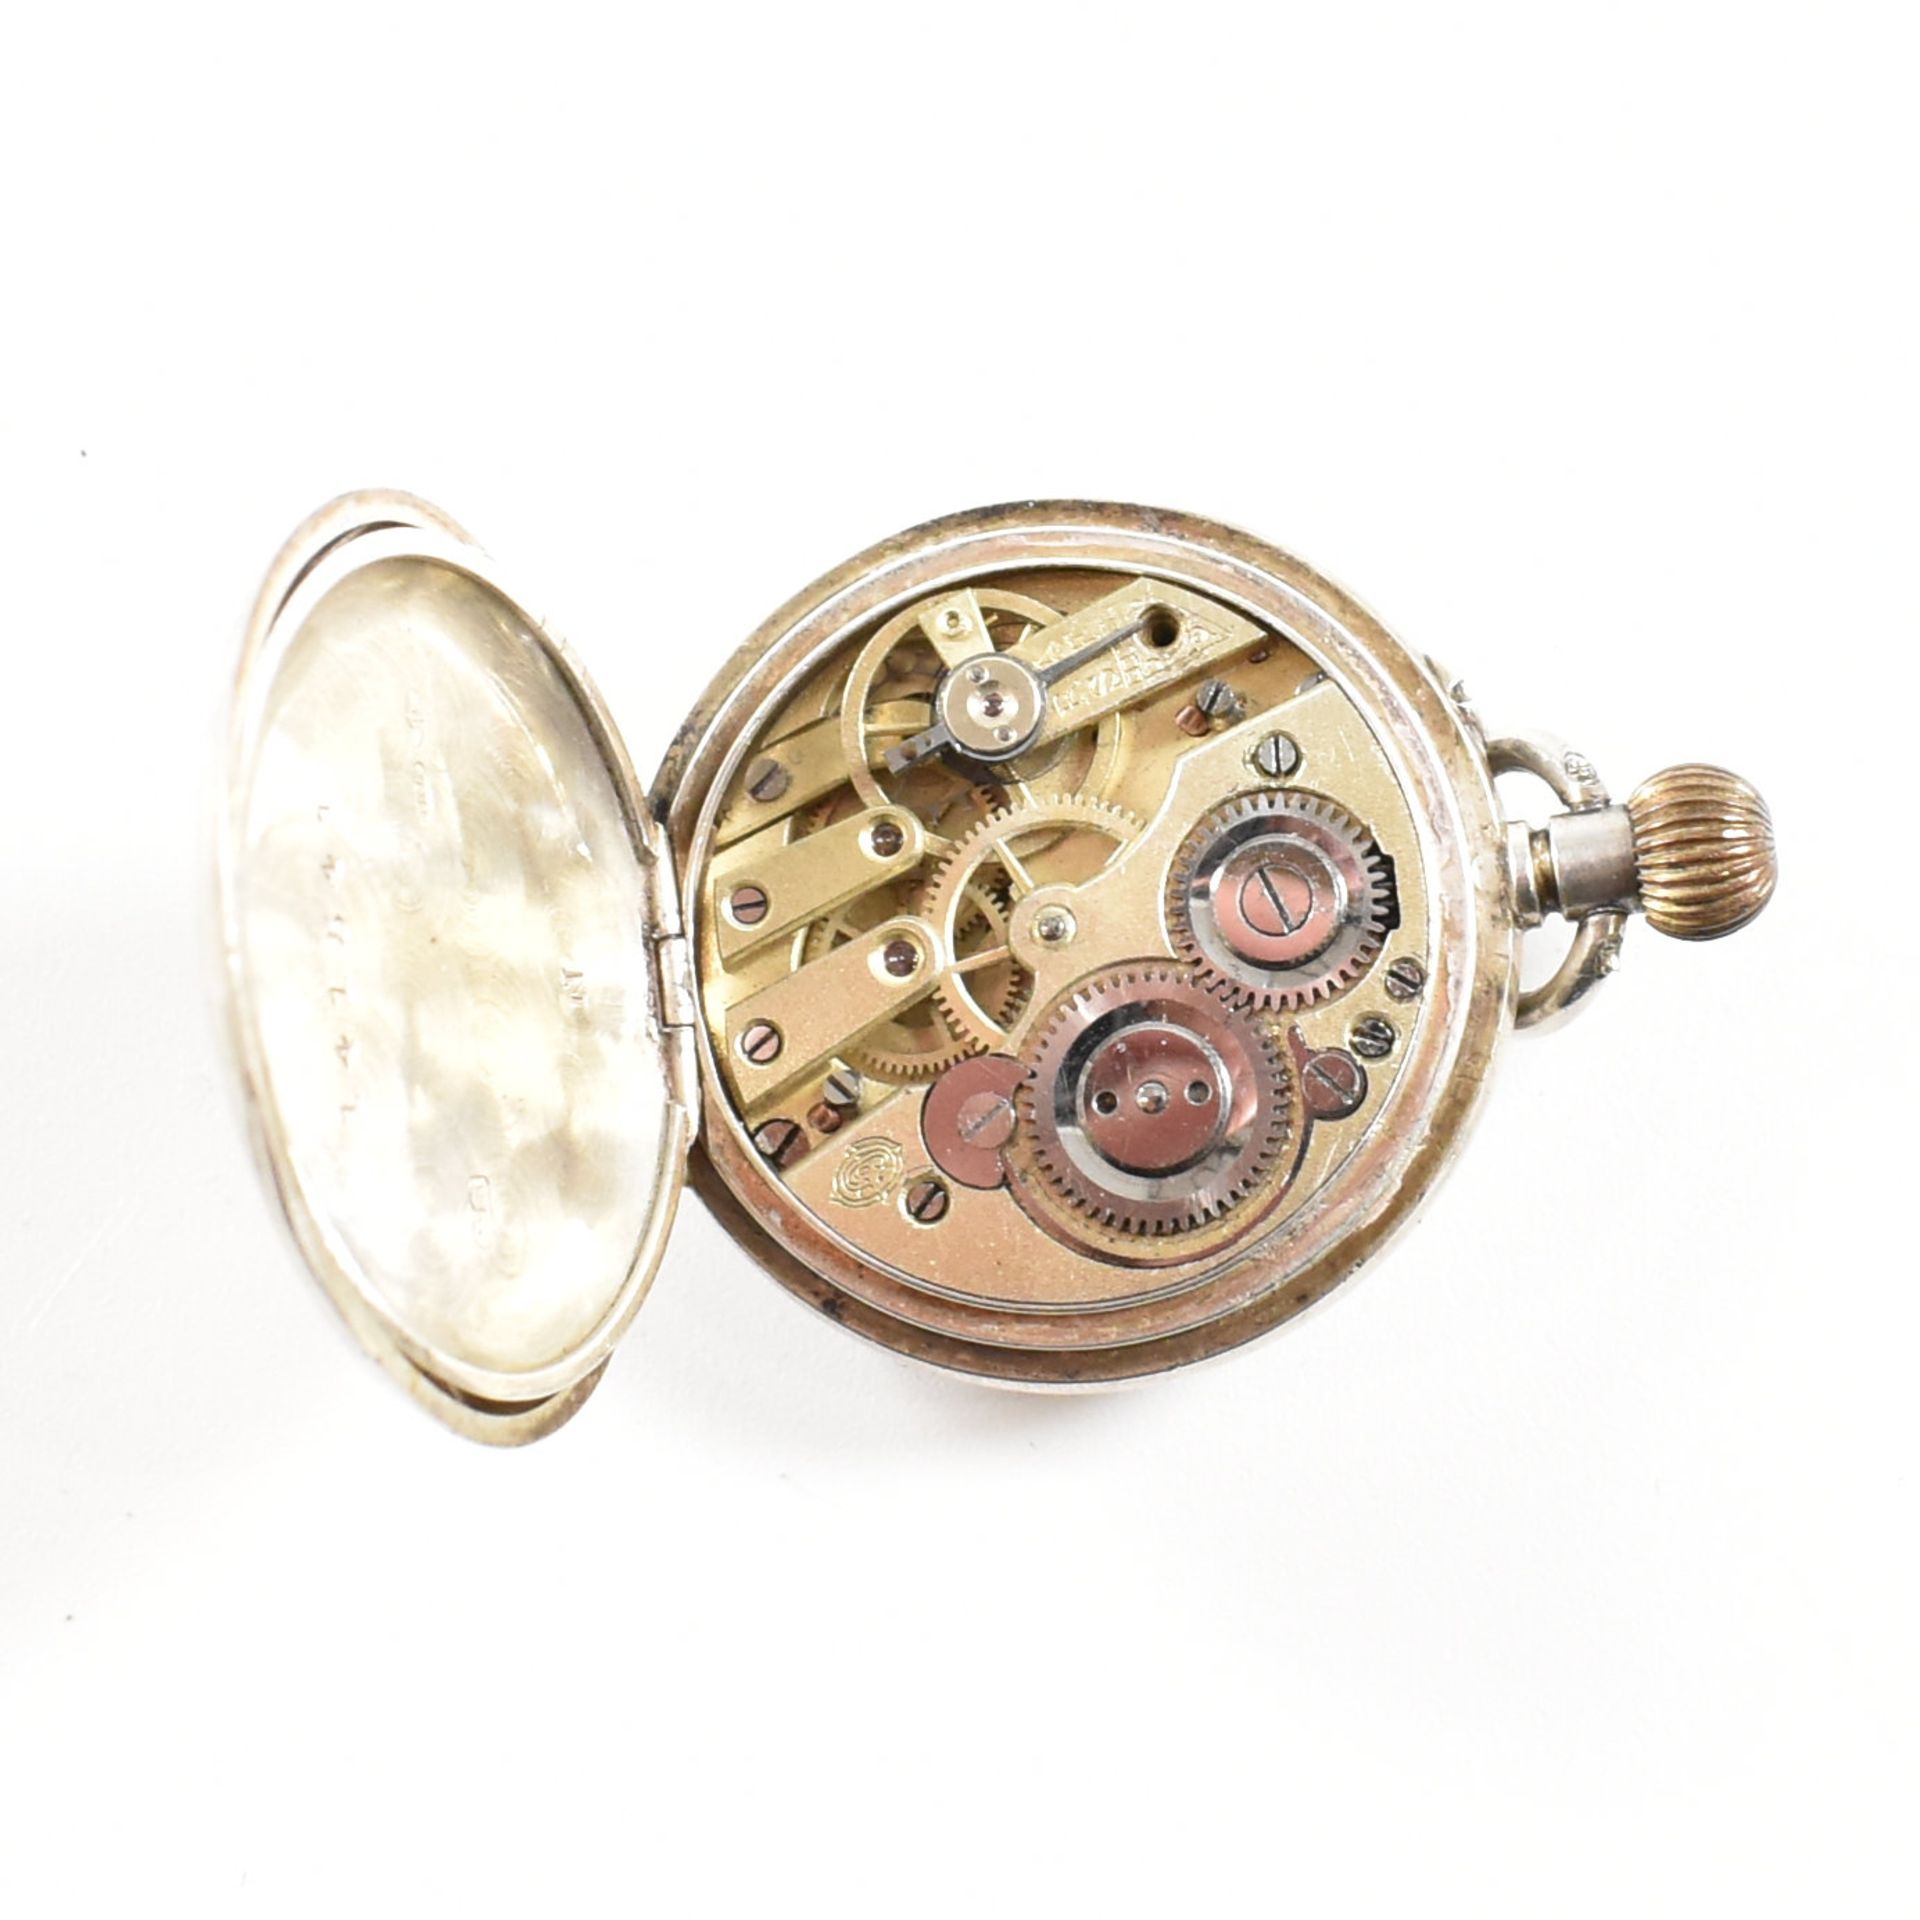 EARLY 20TH CENTURY SILVER FOB POCKET WATCH - Image 5 of 7